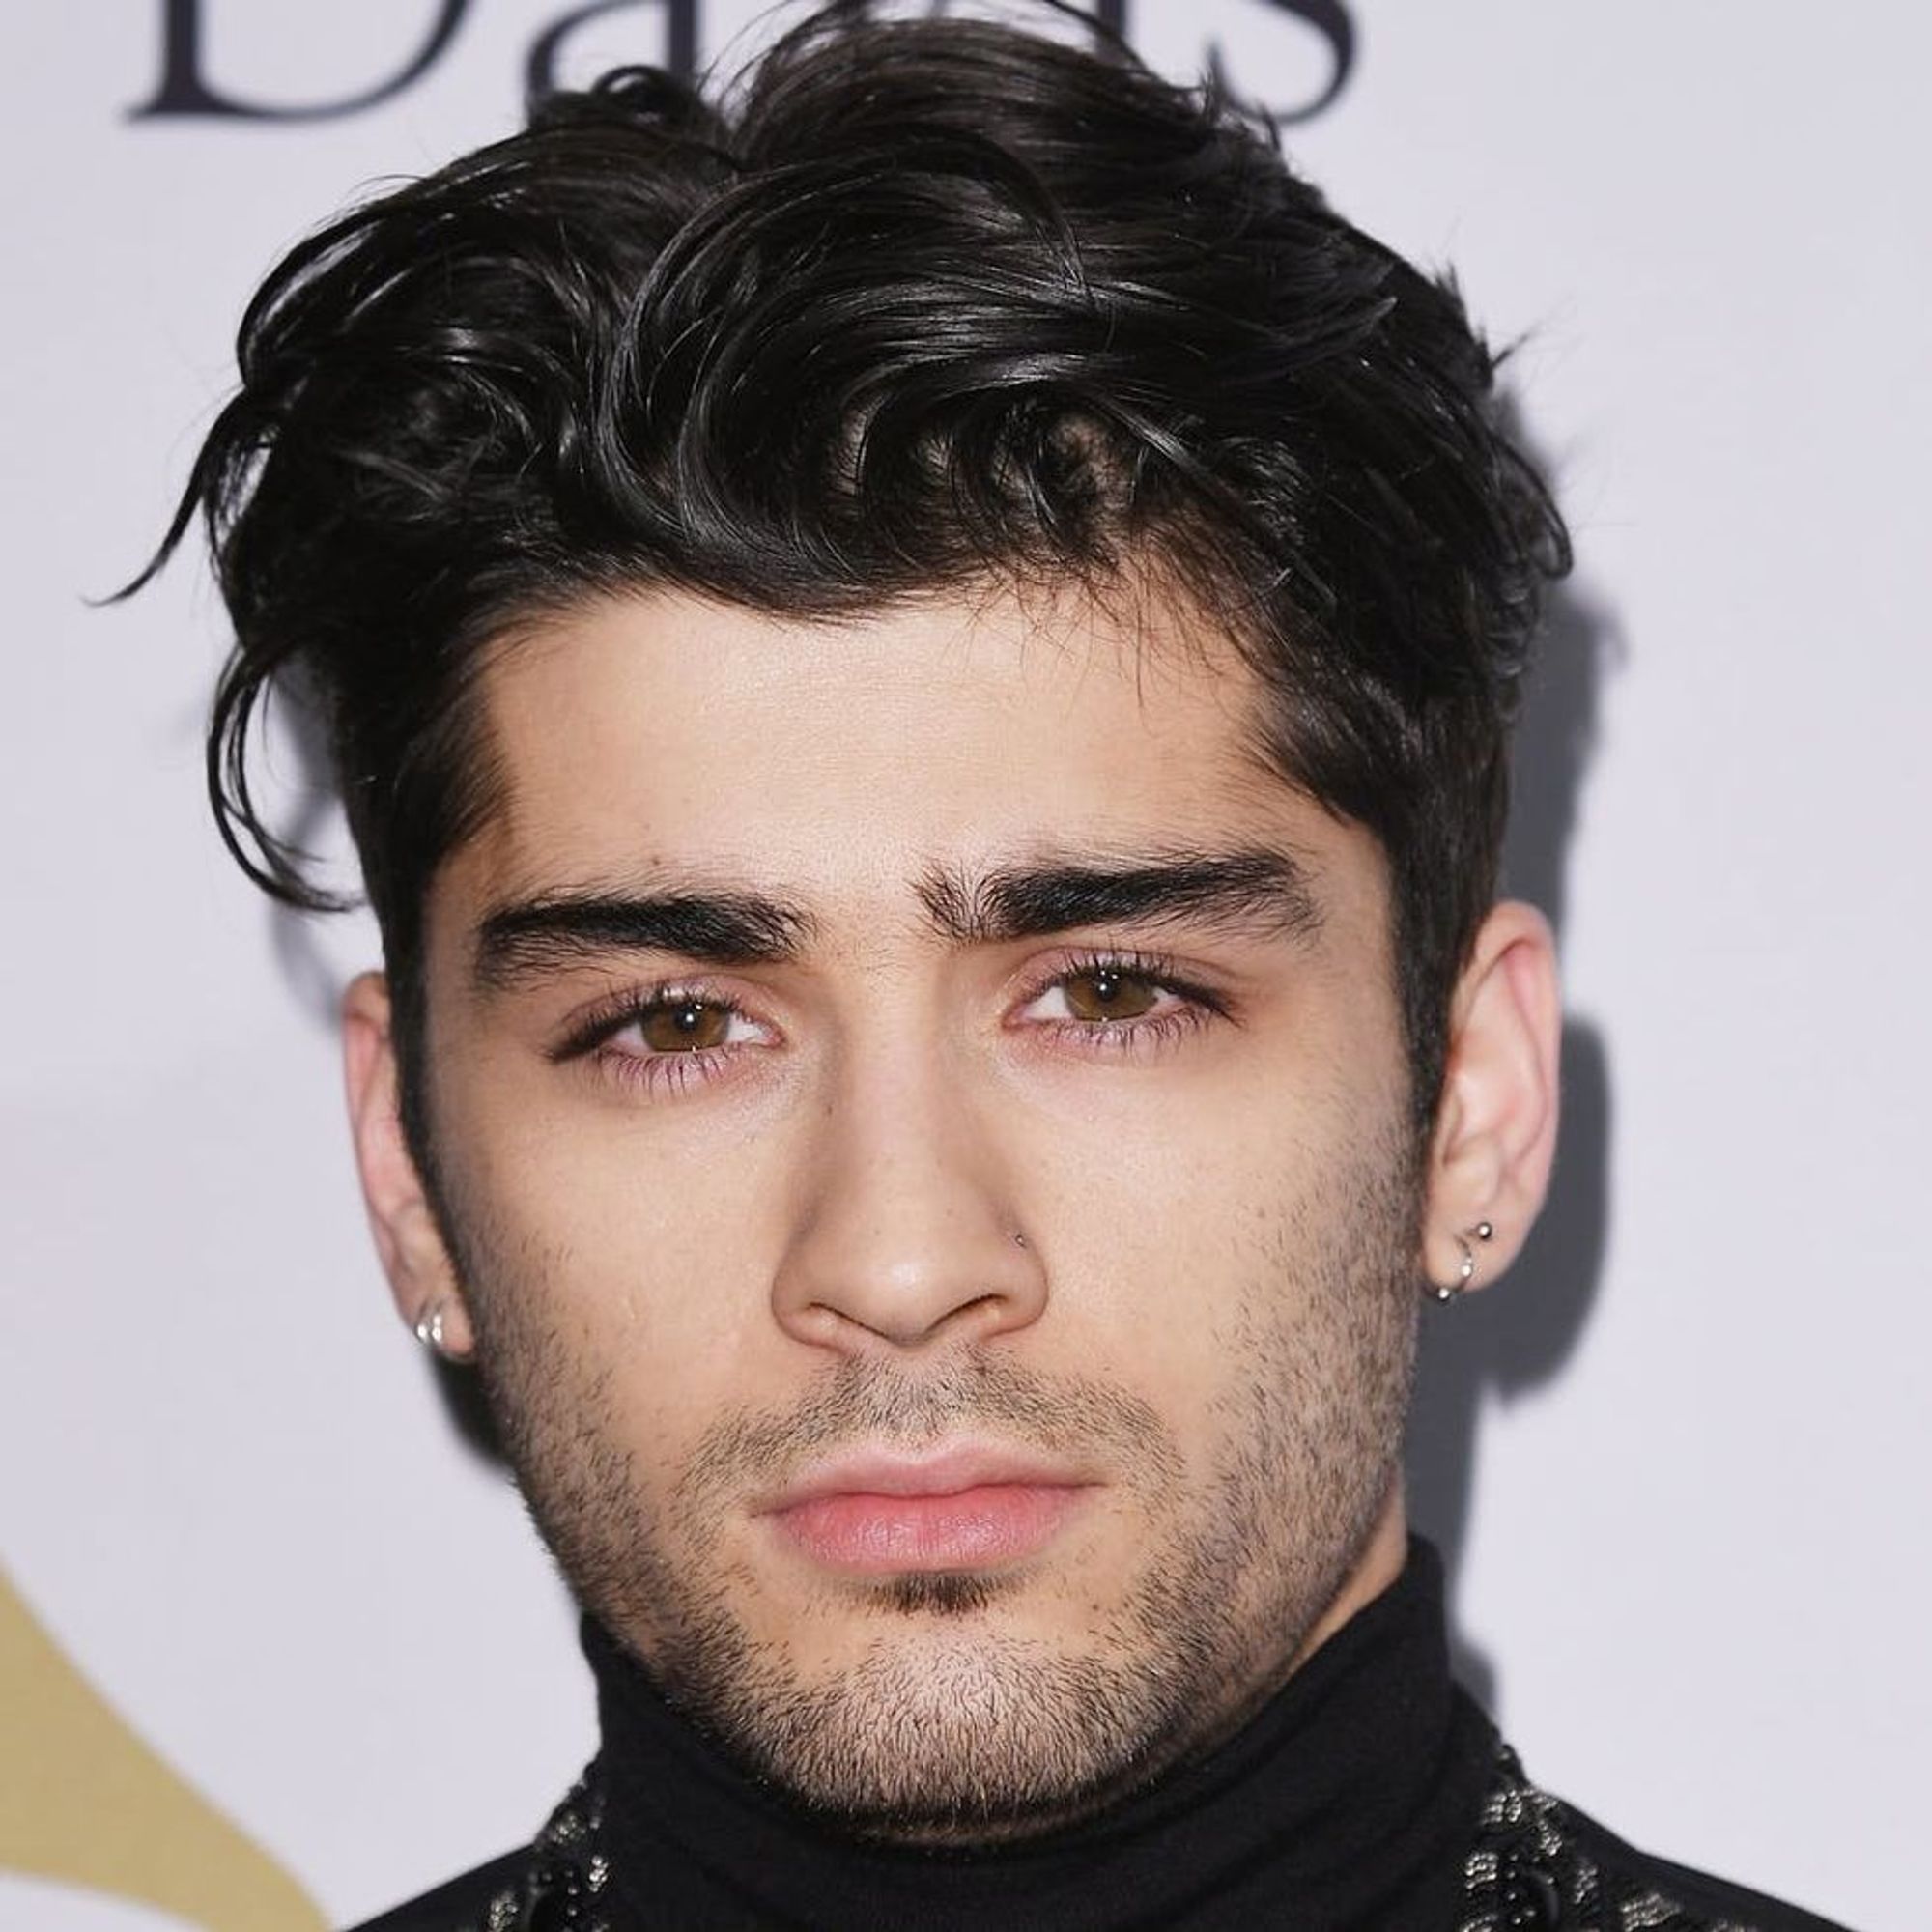 Zayn Malik Is Catching Heat for This Photo of Him in Cornrows - Brit + Co